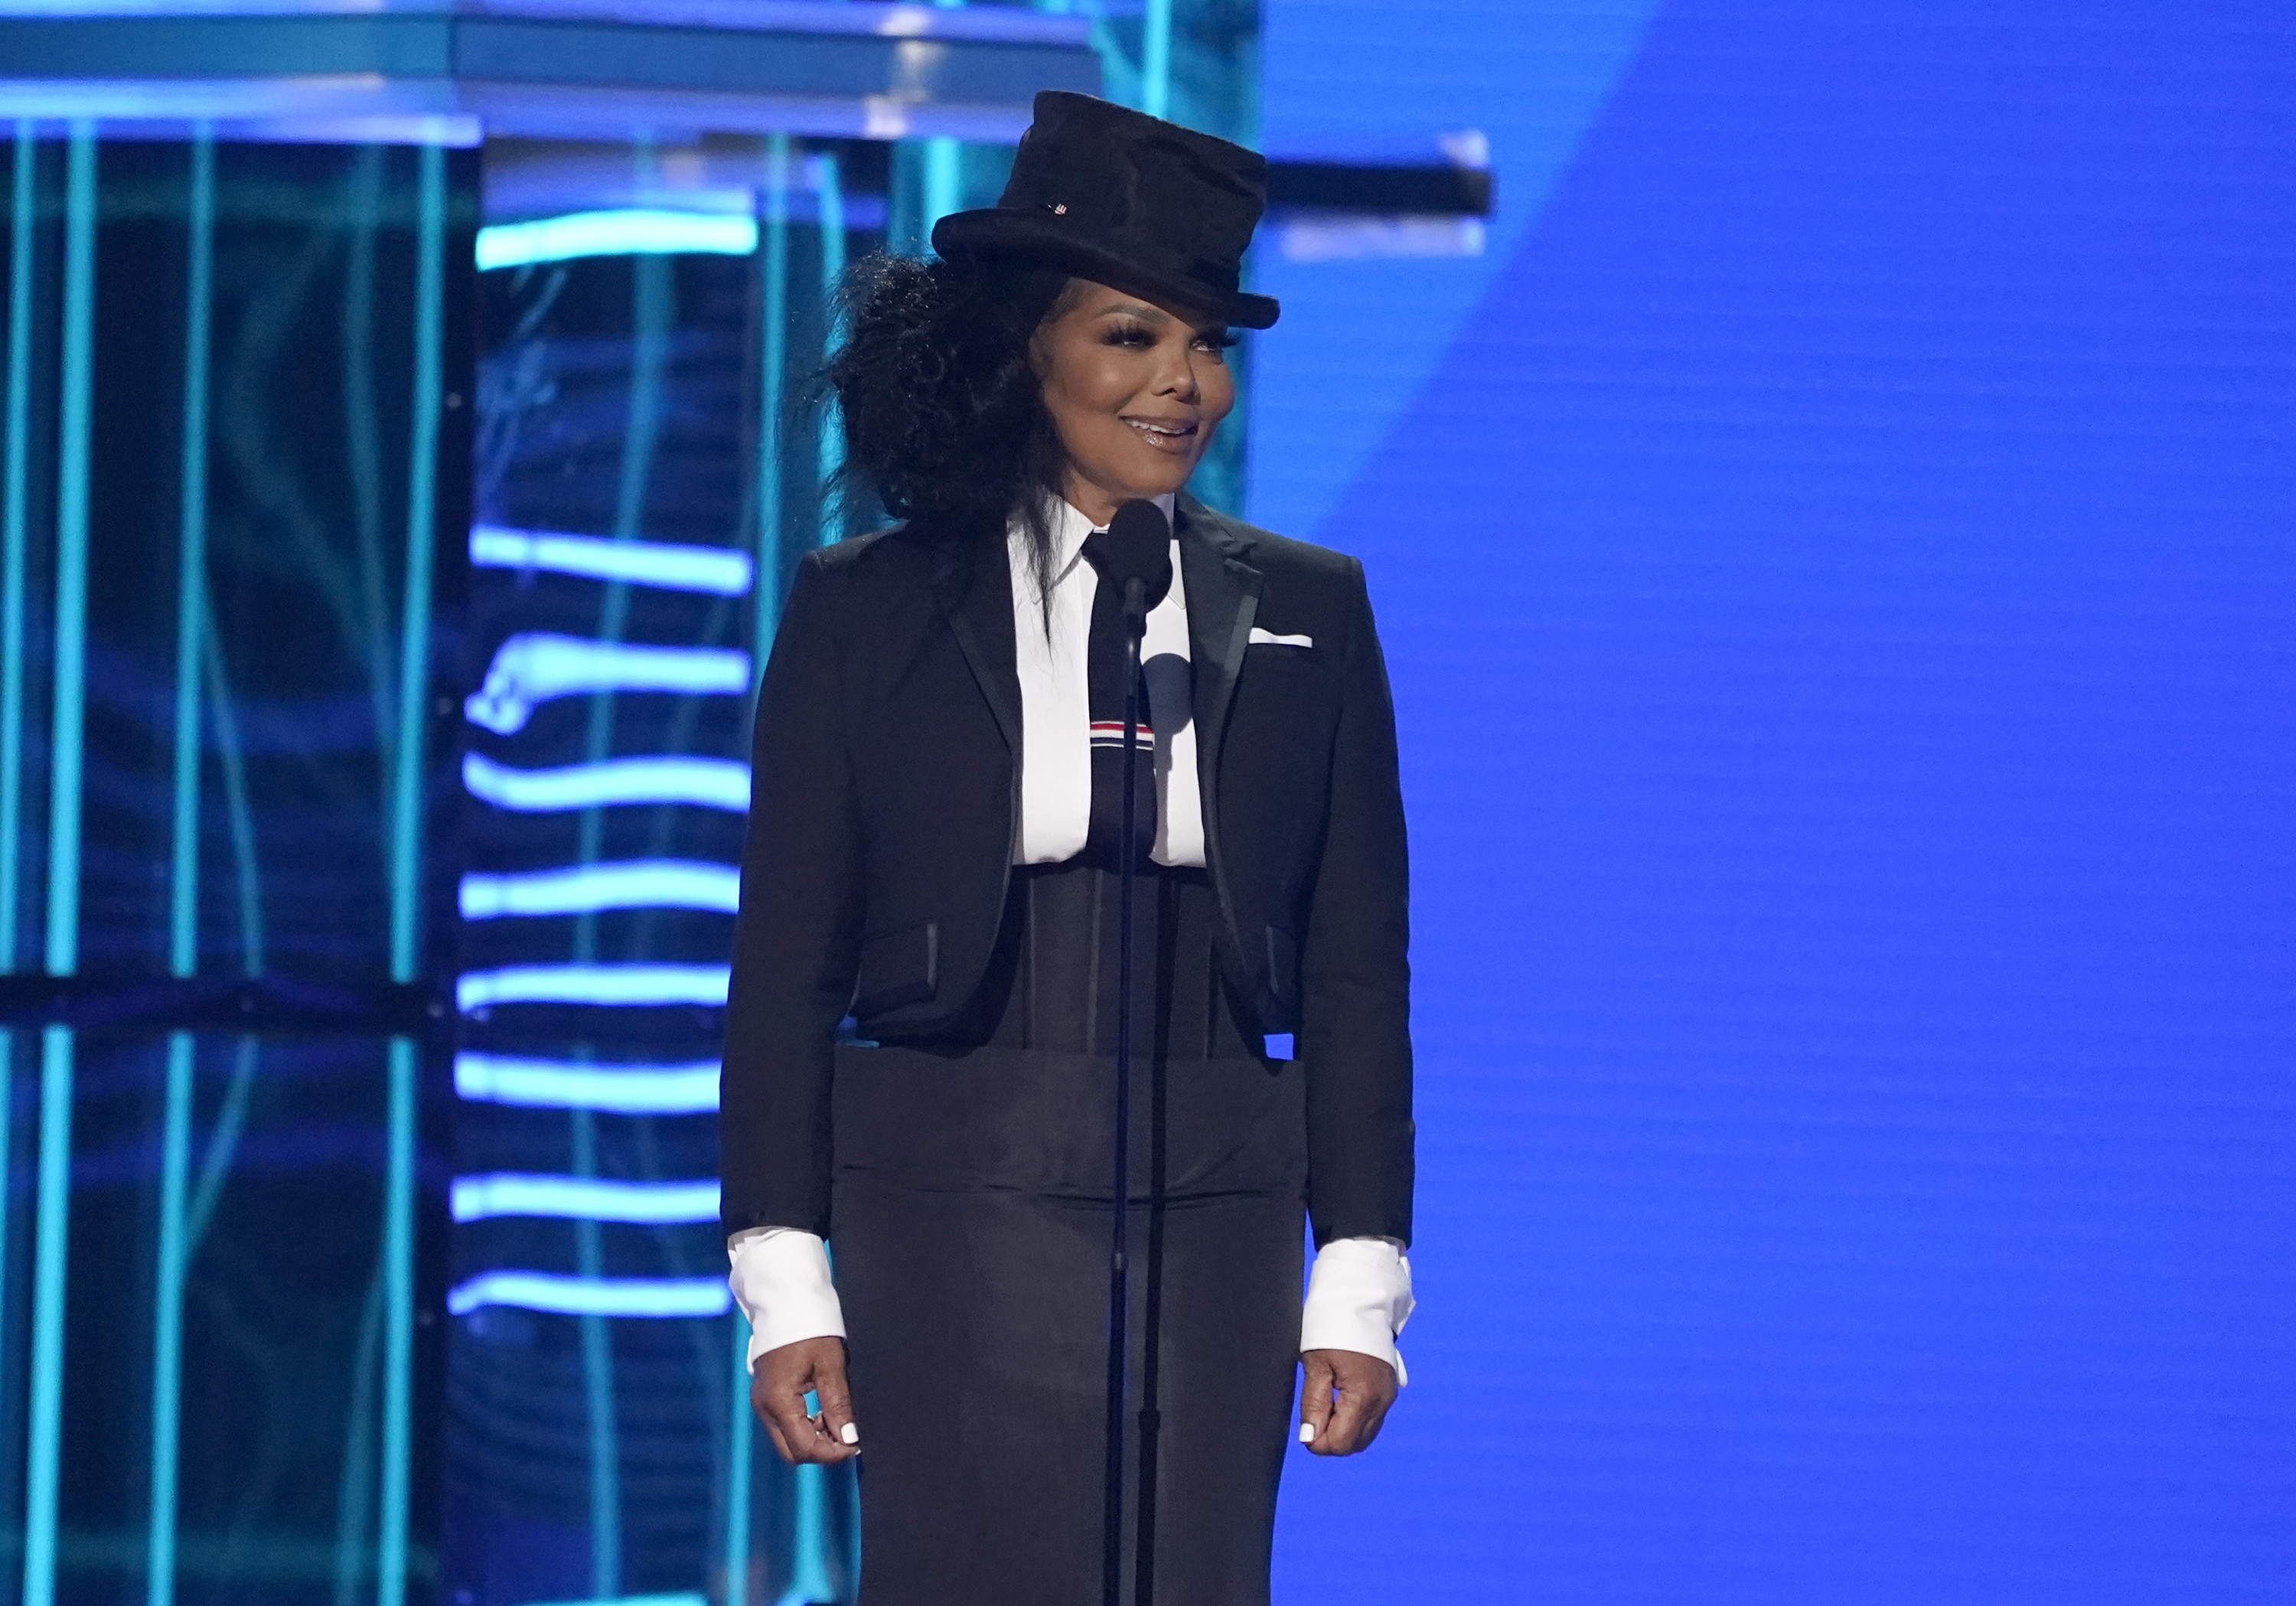 Janet Jackson introduces the Icon Award at the Billboard Music Awards